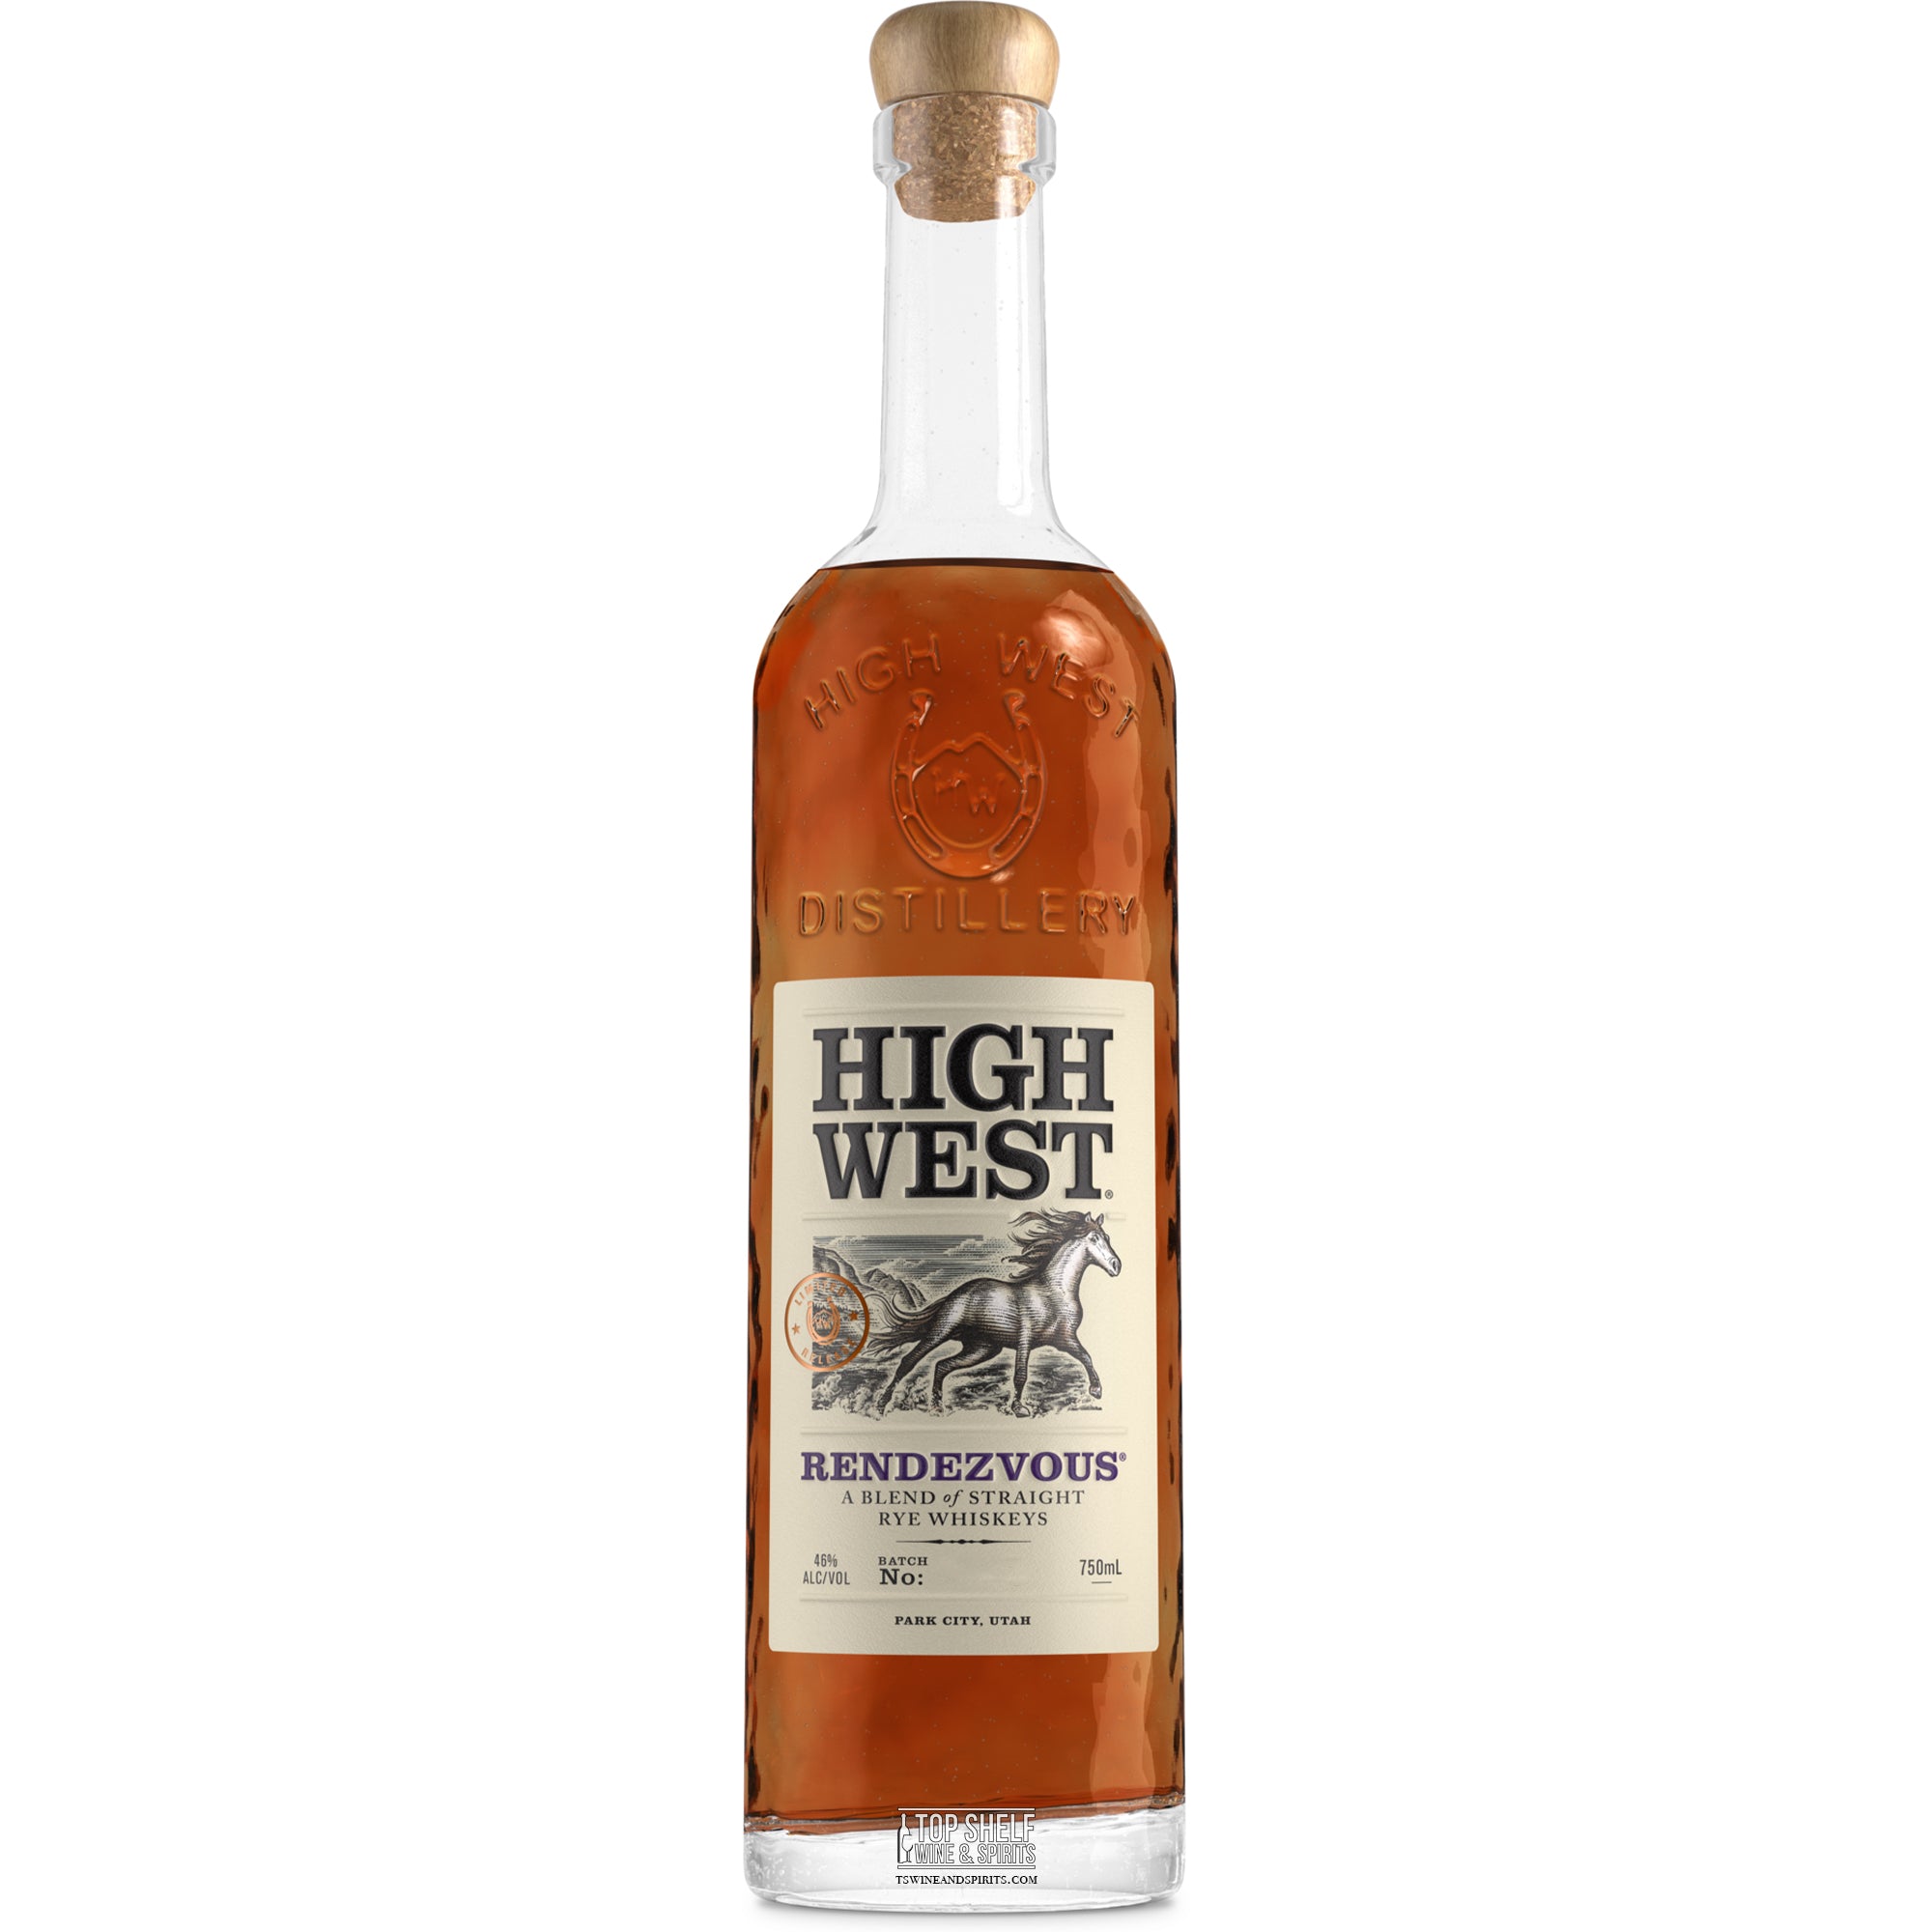 High West Limited Edition Rendezvous Rye Whiskey